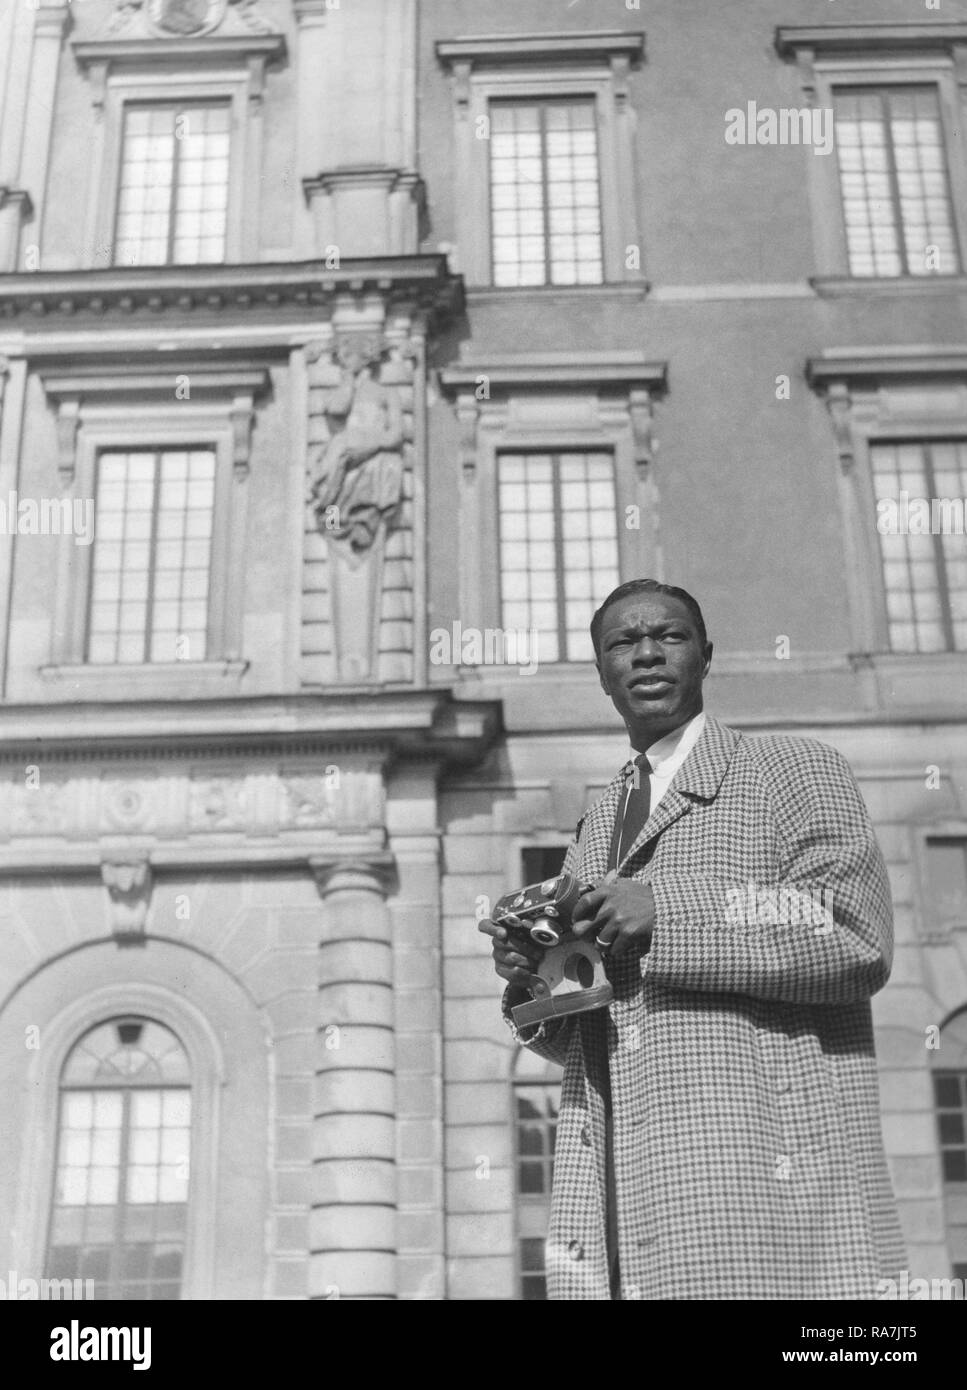 Nat King Cole. March 17, 1919 - Febryary 15, 1965. American jazz pianist and singer. Pictured here during a visit to Stockholm Sweden 1954 when performing there. He is sightseing in the Swedish capital and visits the Royal Castle, and snaps some pictures with his camera. Photo Kristoffersson. Stock Photo